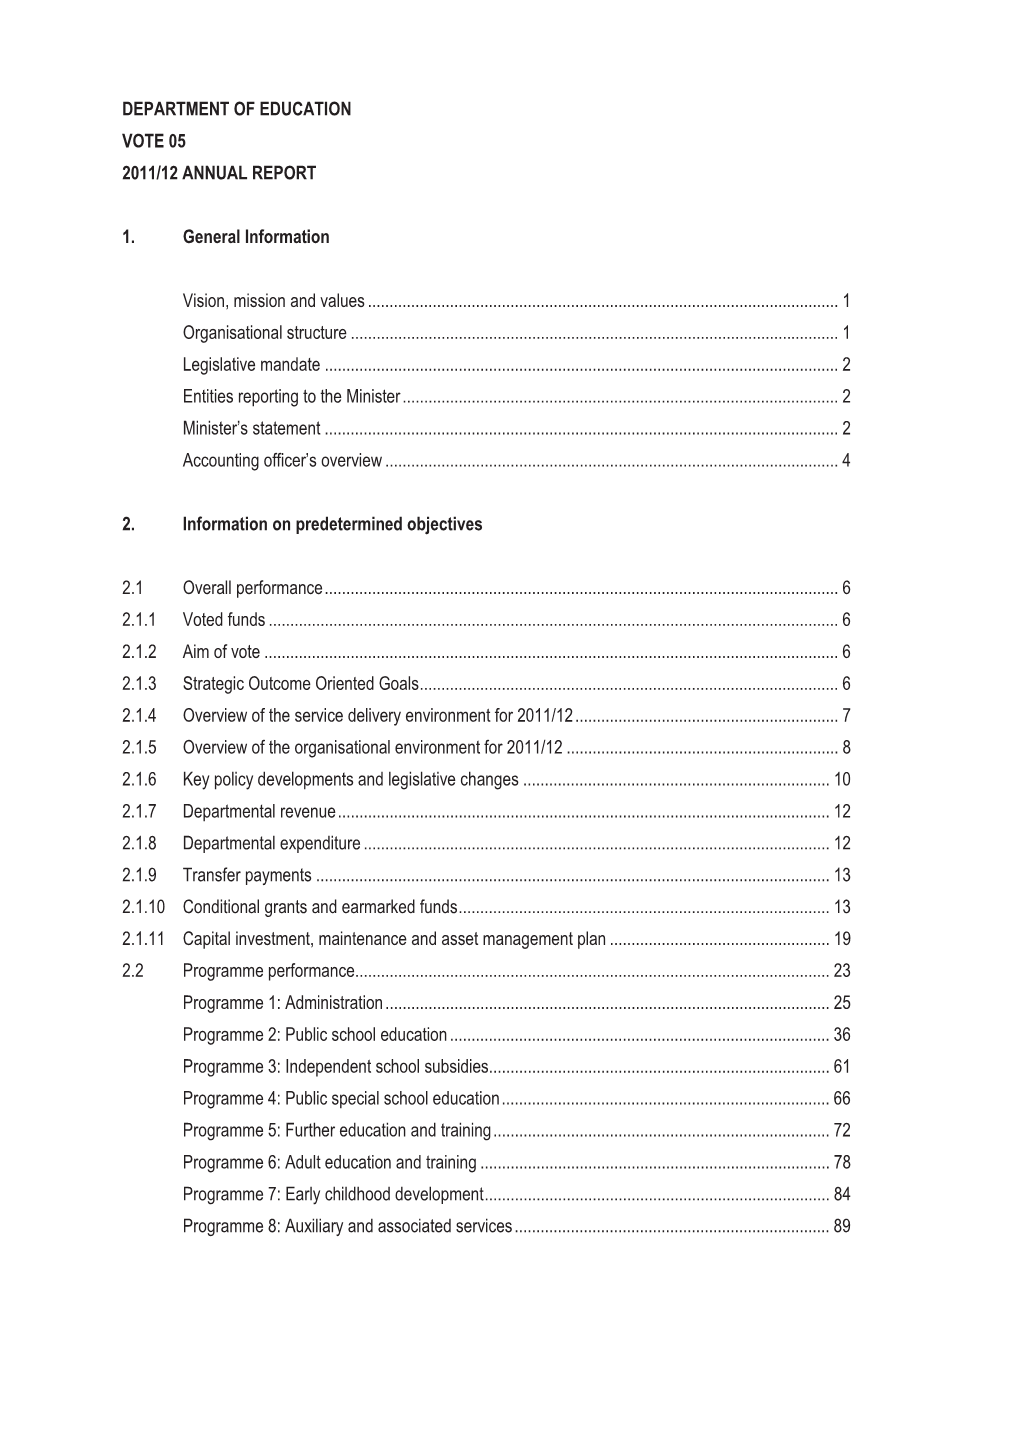 DEPARTMENT of EDUCATION VOTE 05 2011/12 ANNUAL REPORT 1. General Information Vision, Mission and Values